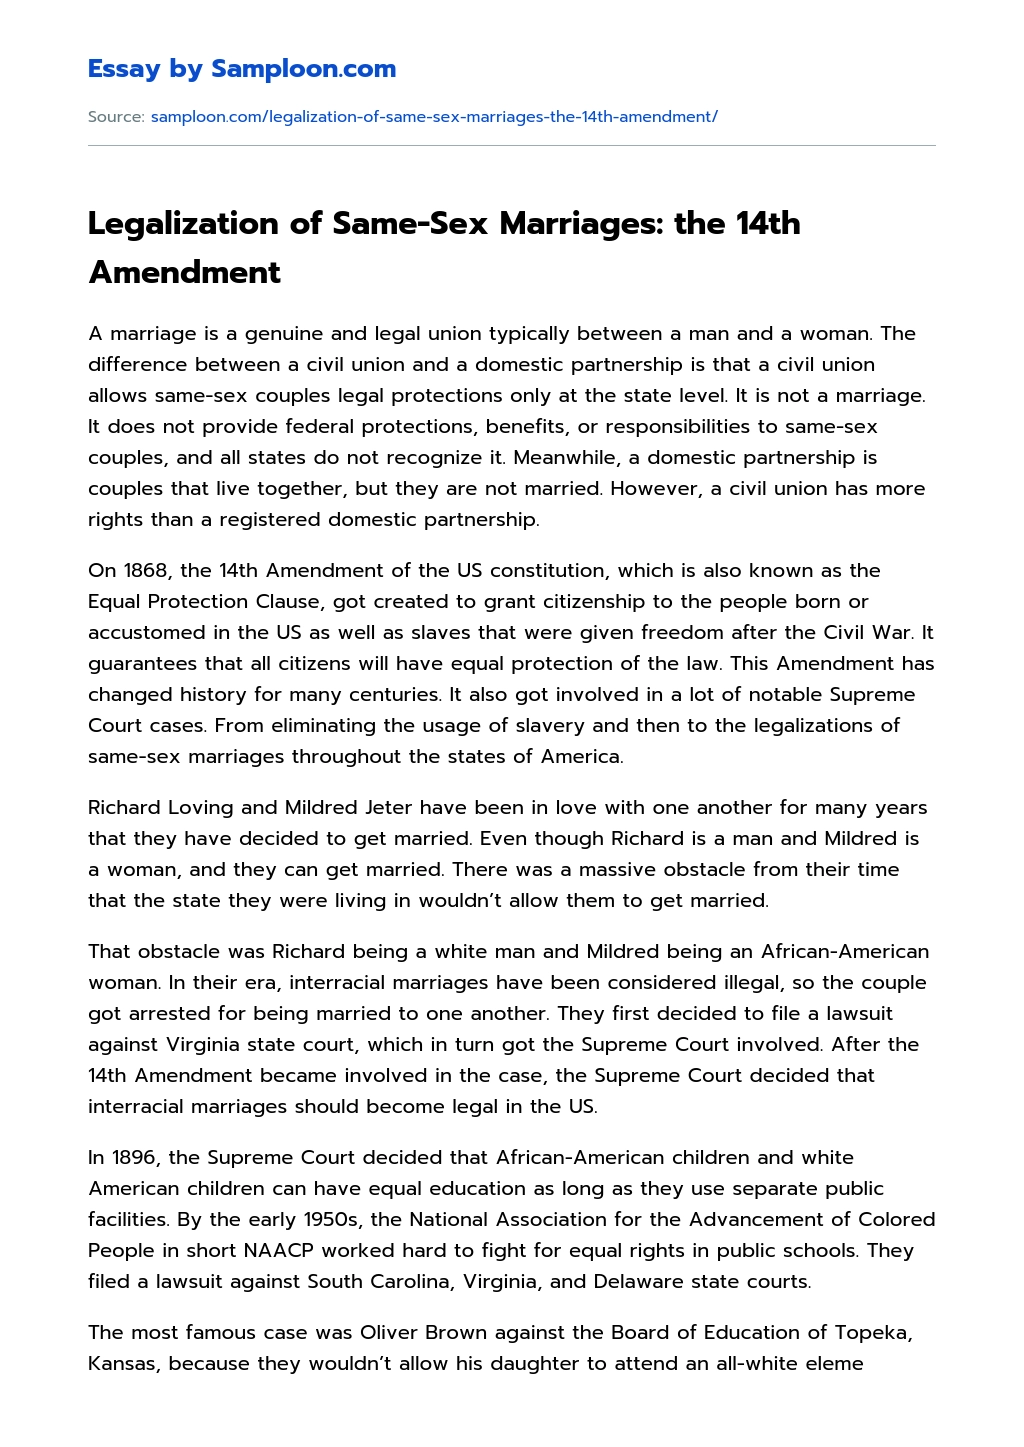 Legalization of Same-Sex Marriages: the 14th Amendment essay